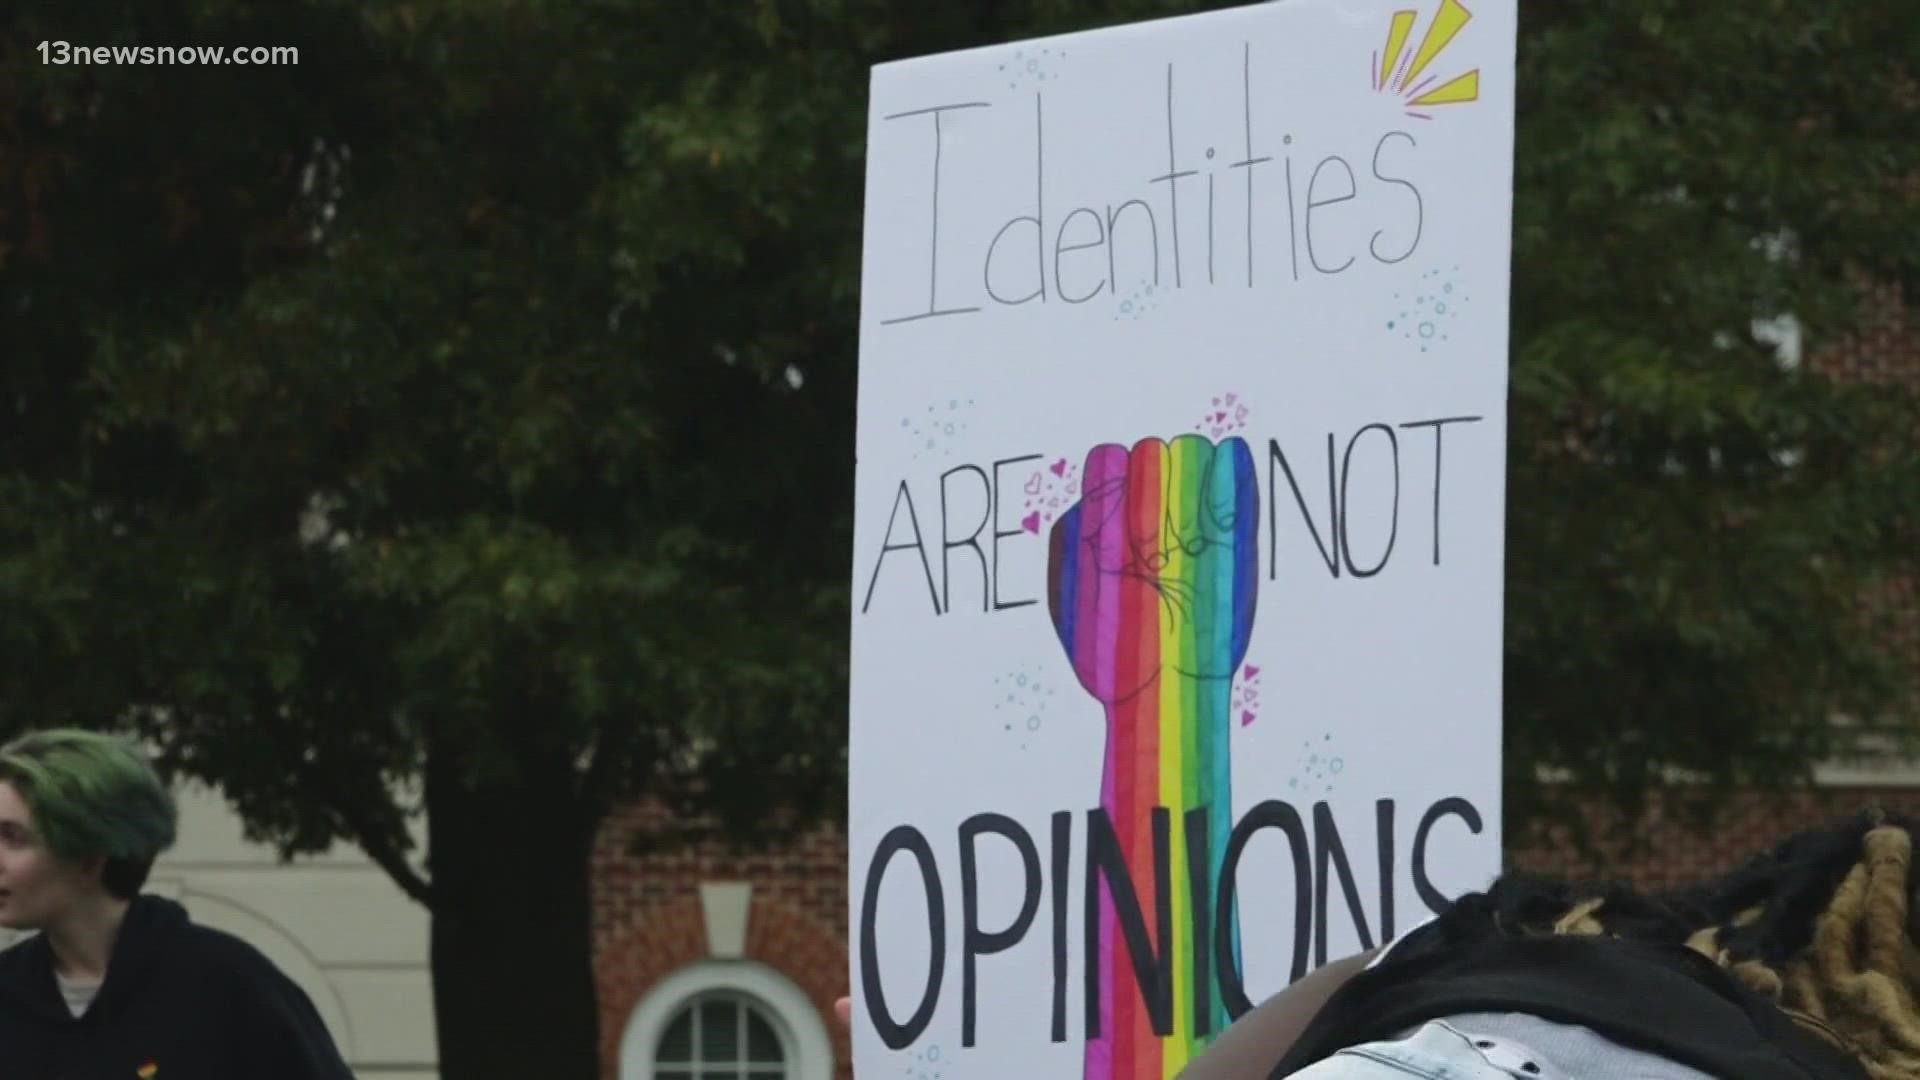 The students protested saying they won't tolerate any negative speech towards the LGBTQ community.